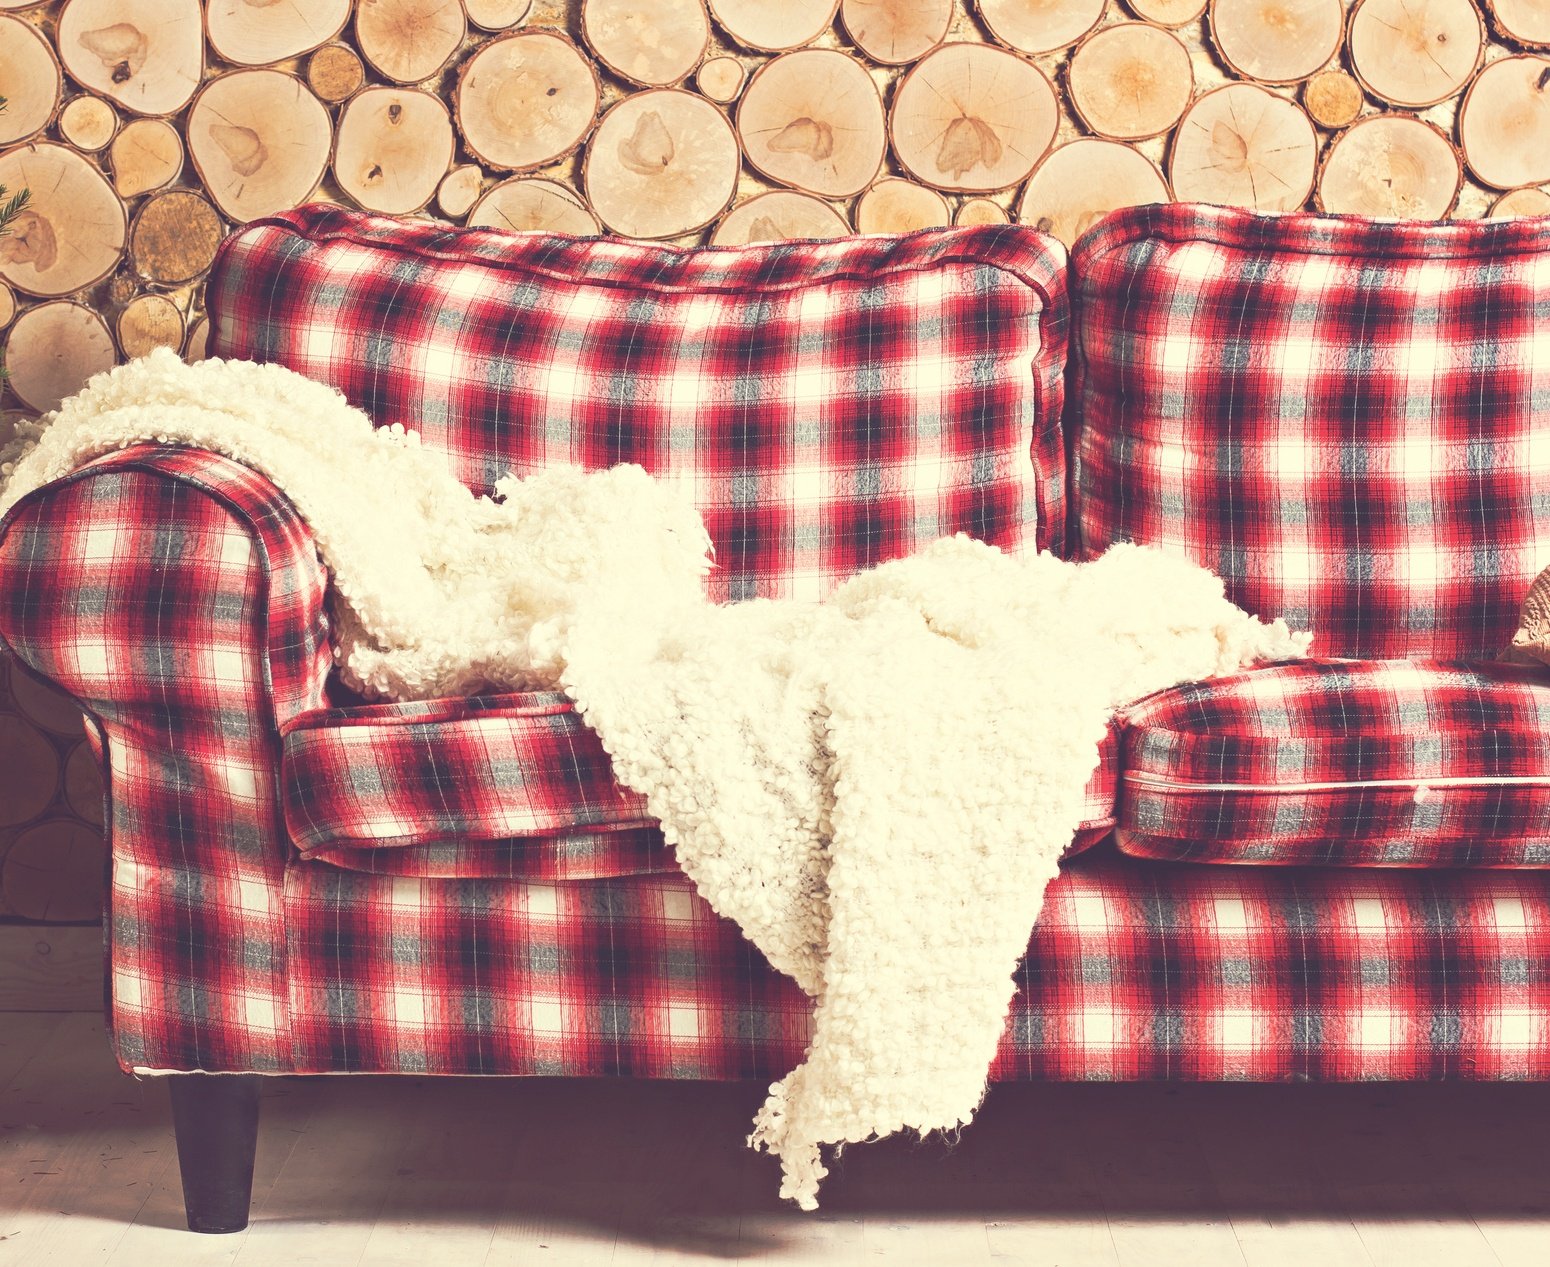 Red Plaid couch with wooden wall